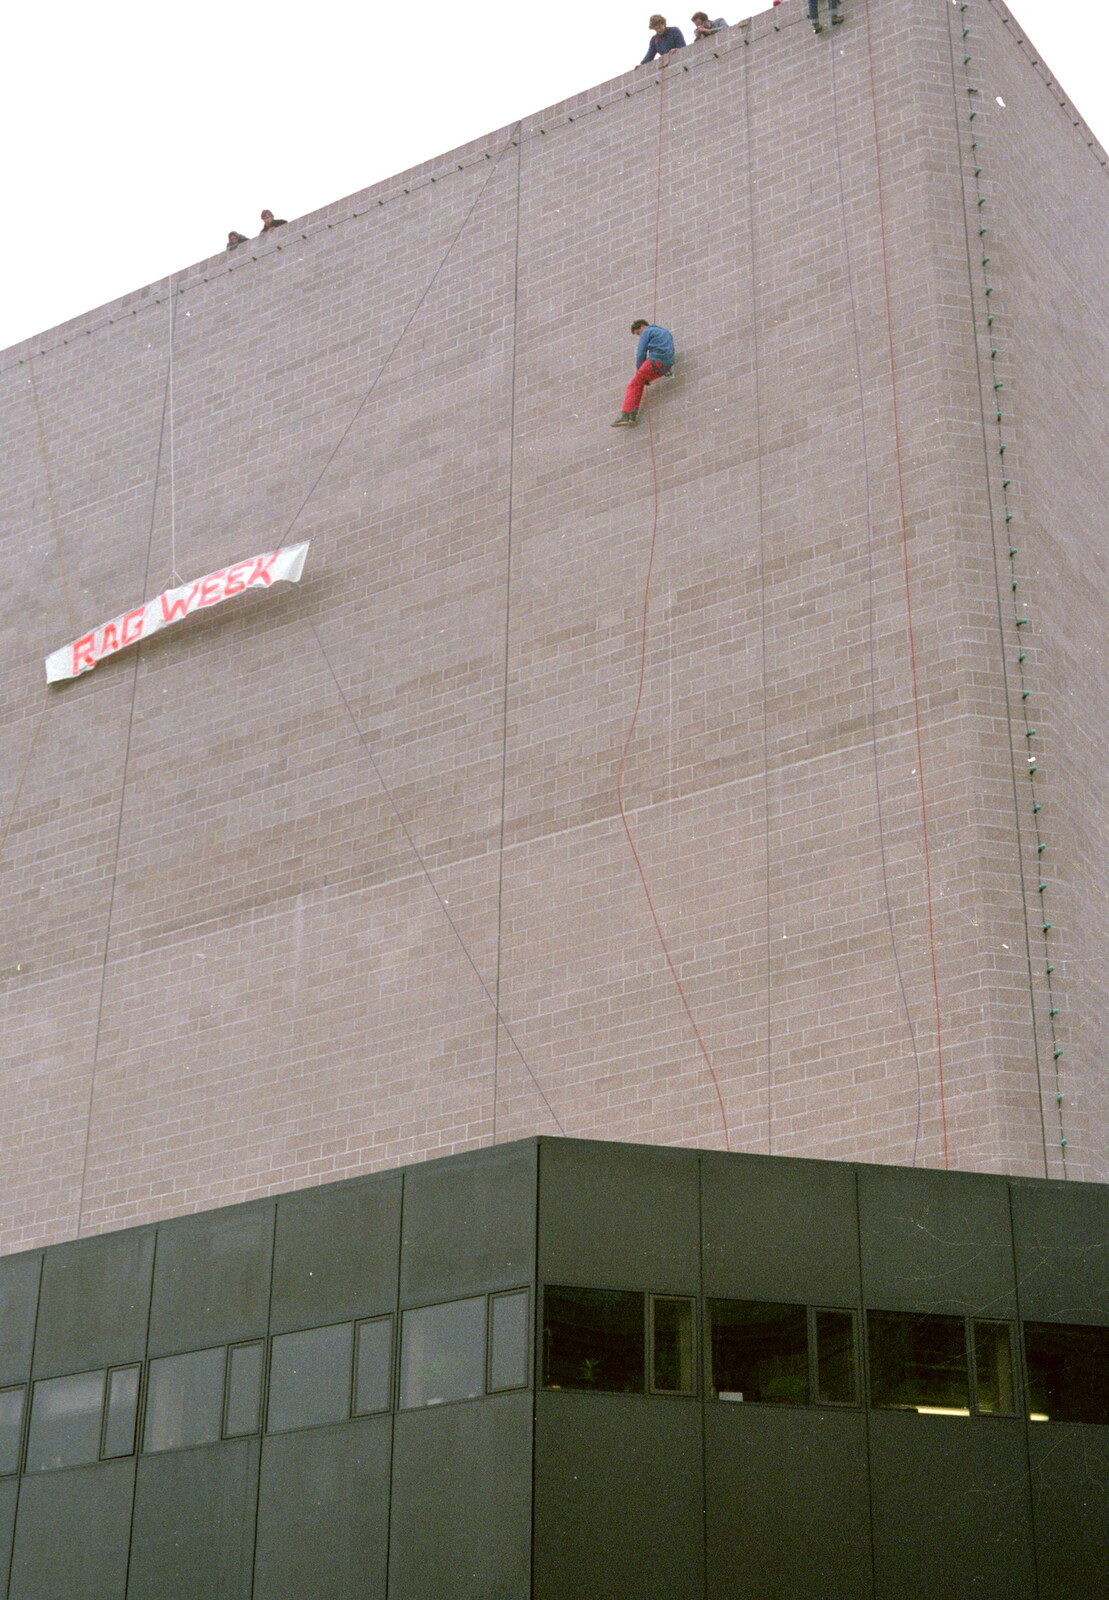 A RAG week sign is hung up on the Theatre Royal from Uni: RAG Week Abseil, Hitch Hike, and Beaumont Street Life Plymouth, Devon - 13th February 1986